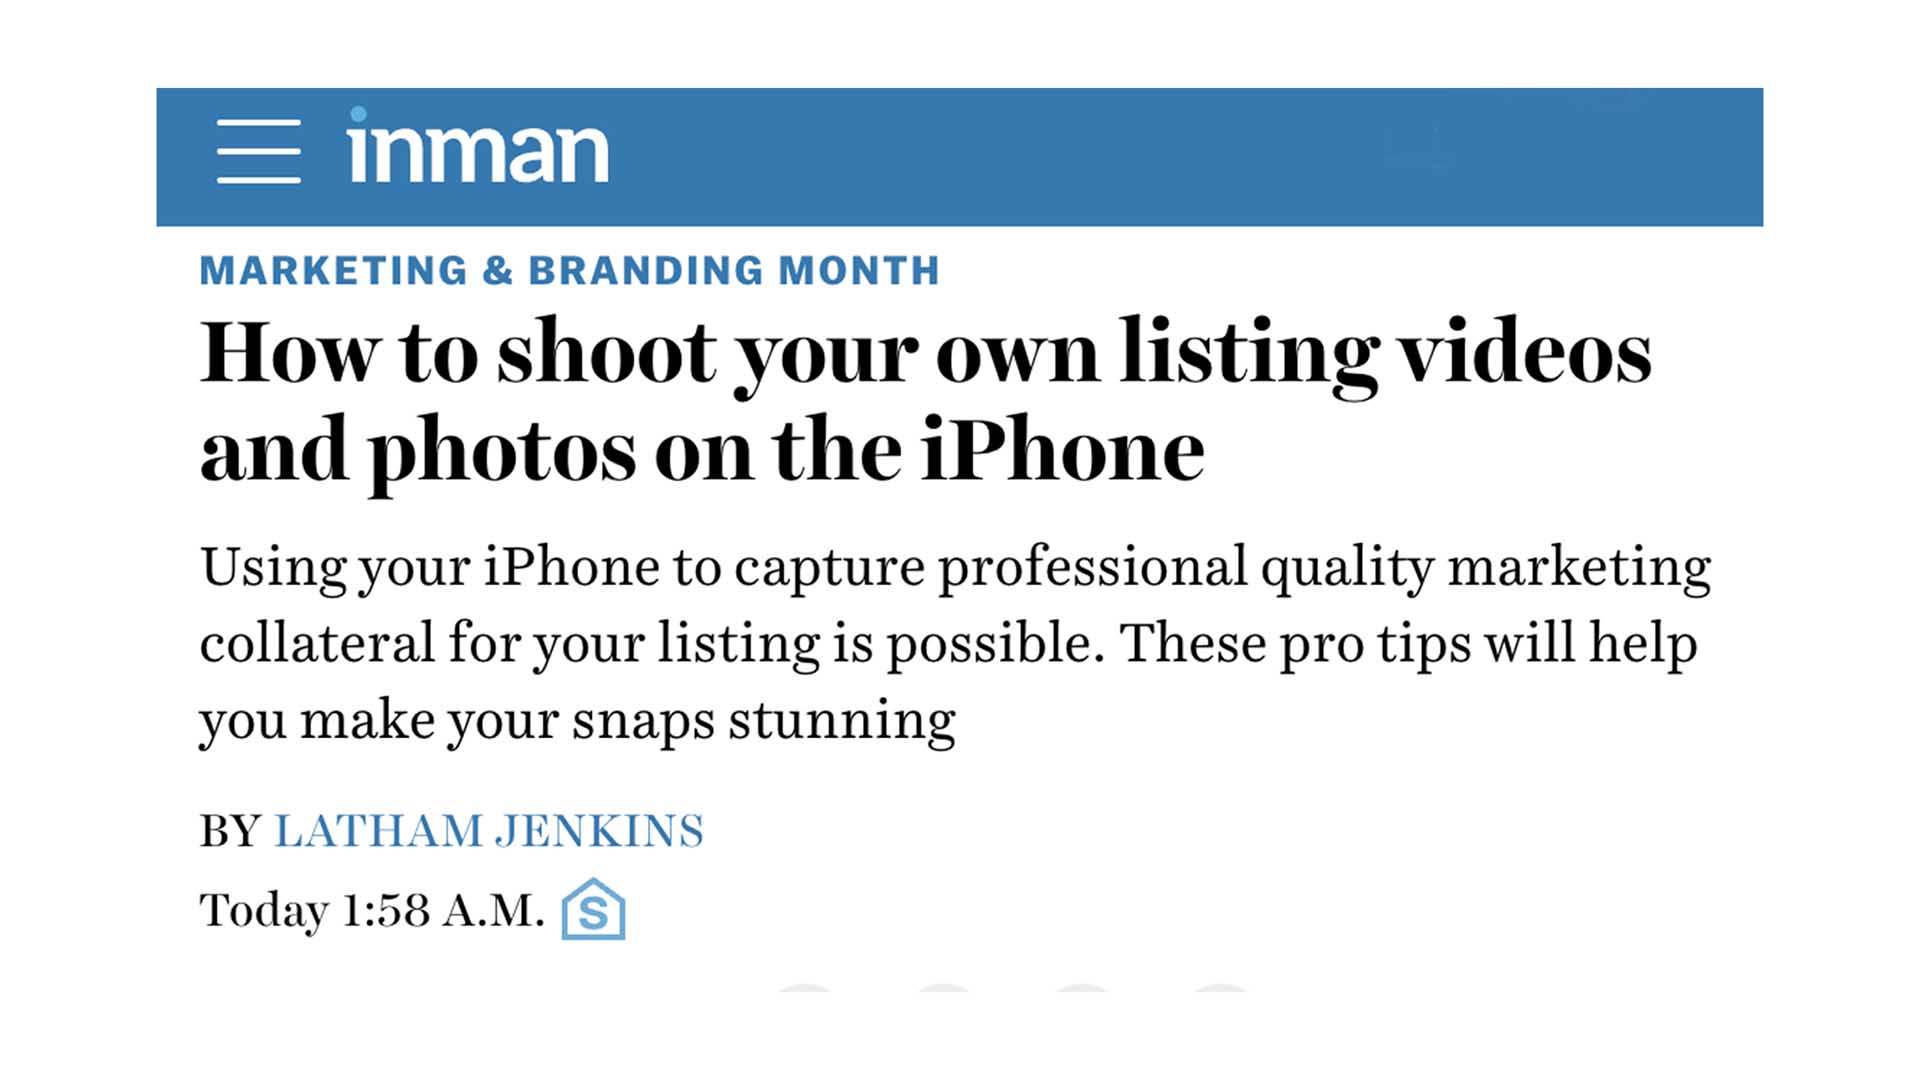 Inman News features Latham Jenkins on how to shoot listing video and photos